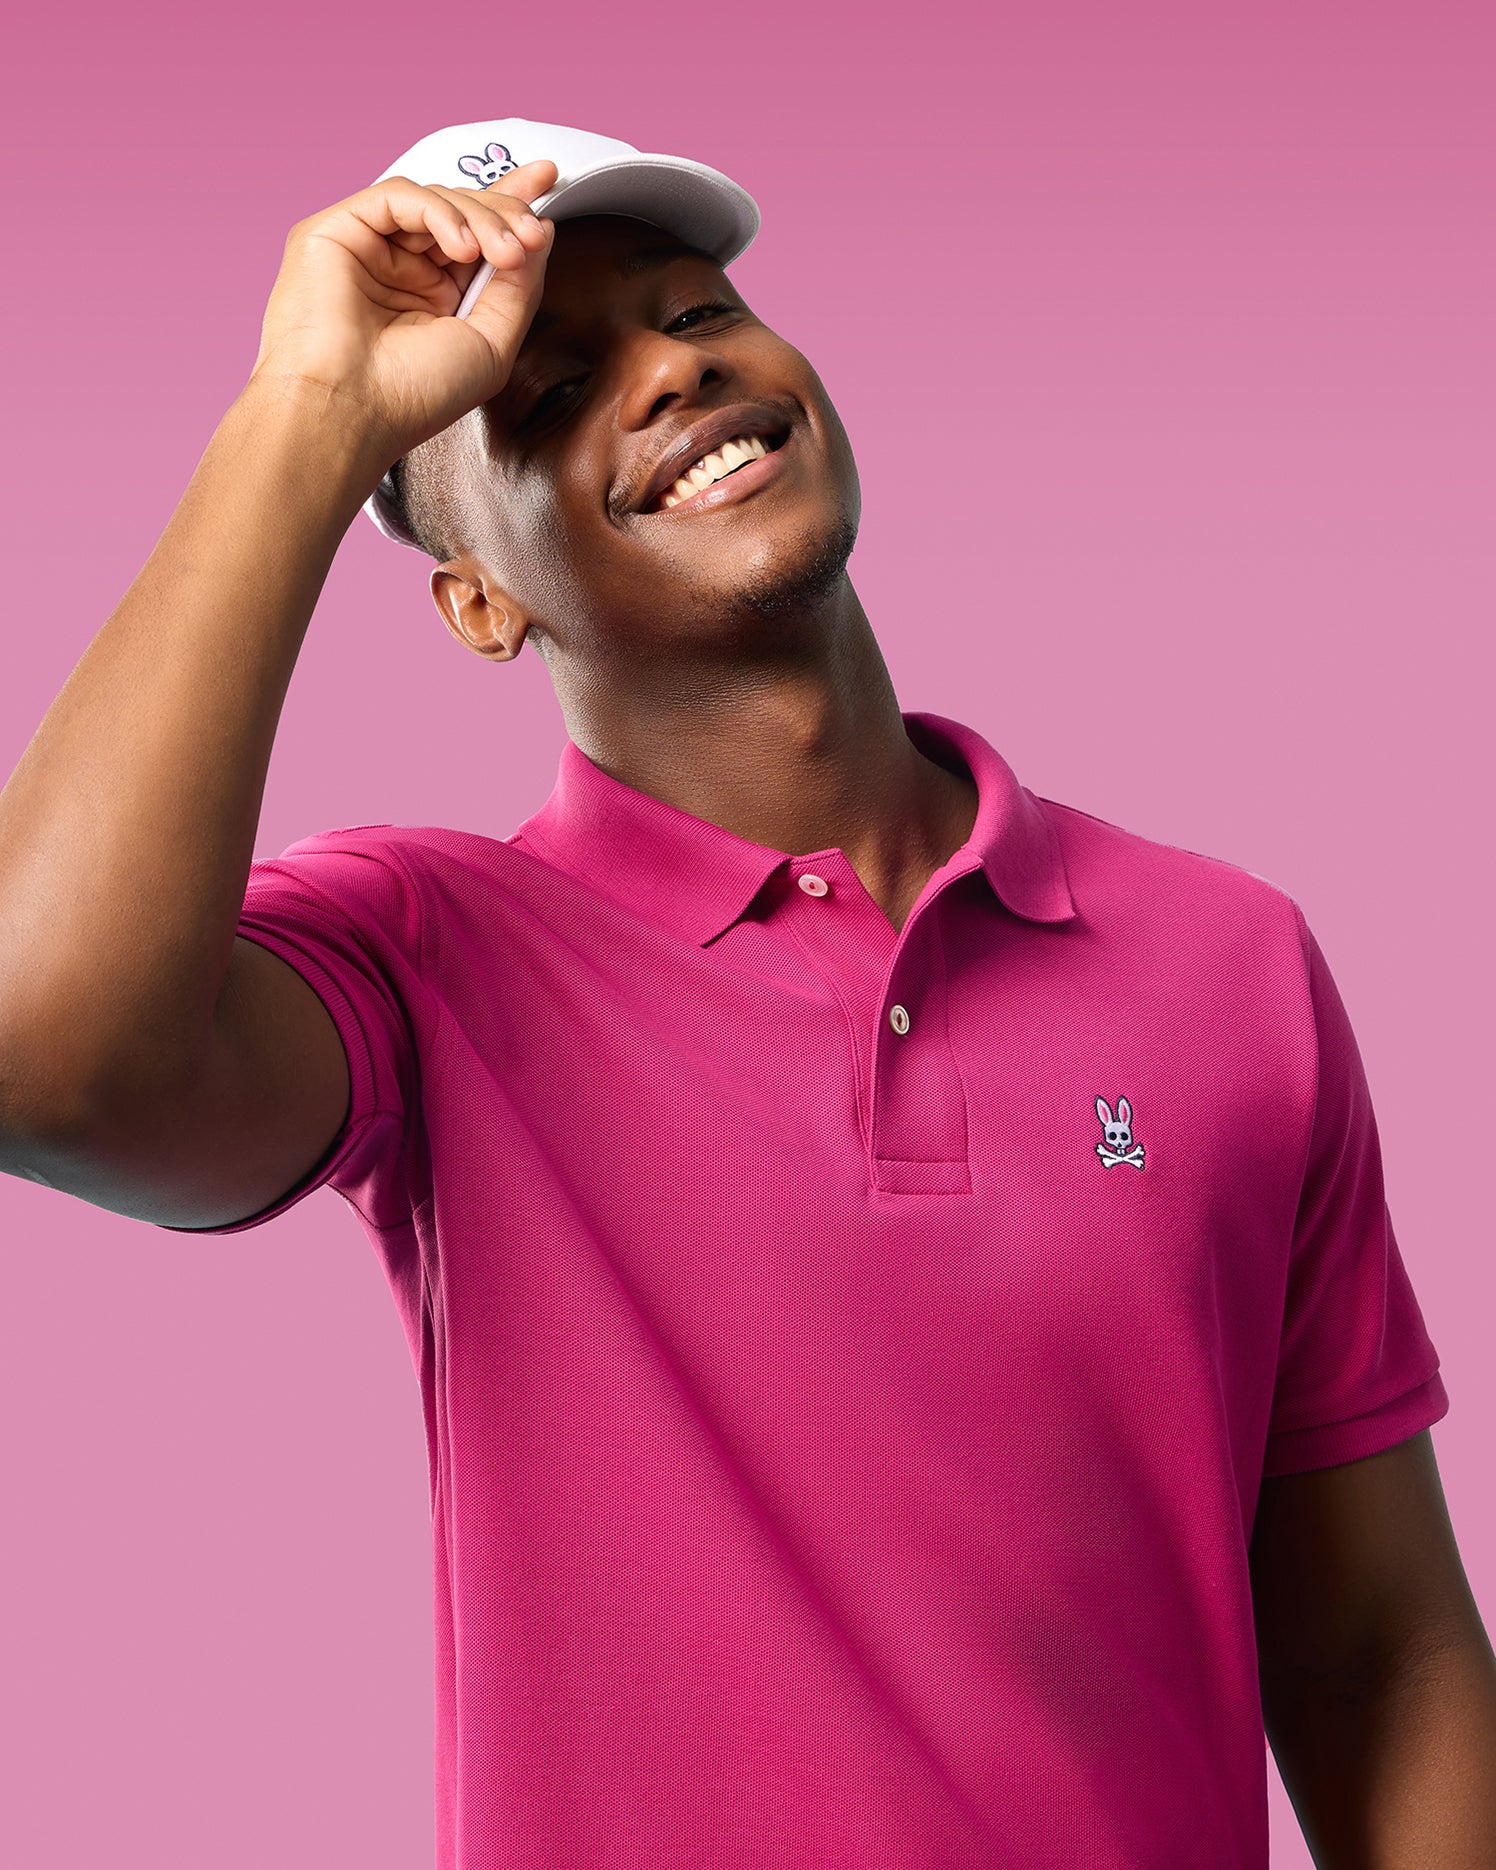 A smiling young man tilting a white cap with a Psycho Bunny logo, wearing a pink Psycho Bunny Pima cotton polo shirt (MENS CLASSIC POLO - B6K001CRPC) with a matching bunny emblem, against a pink background.